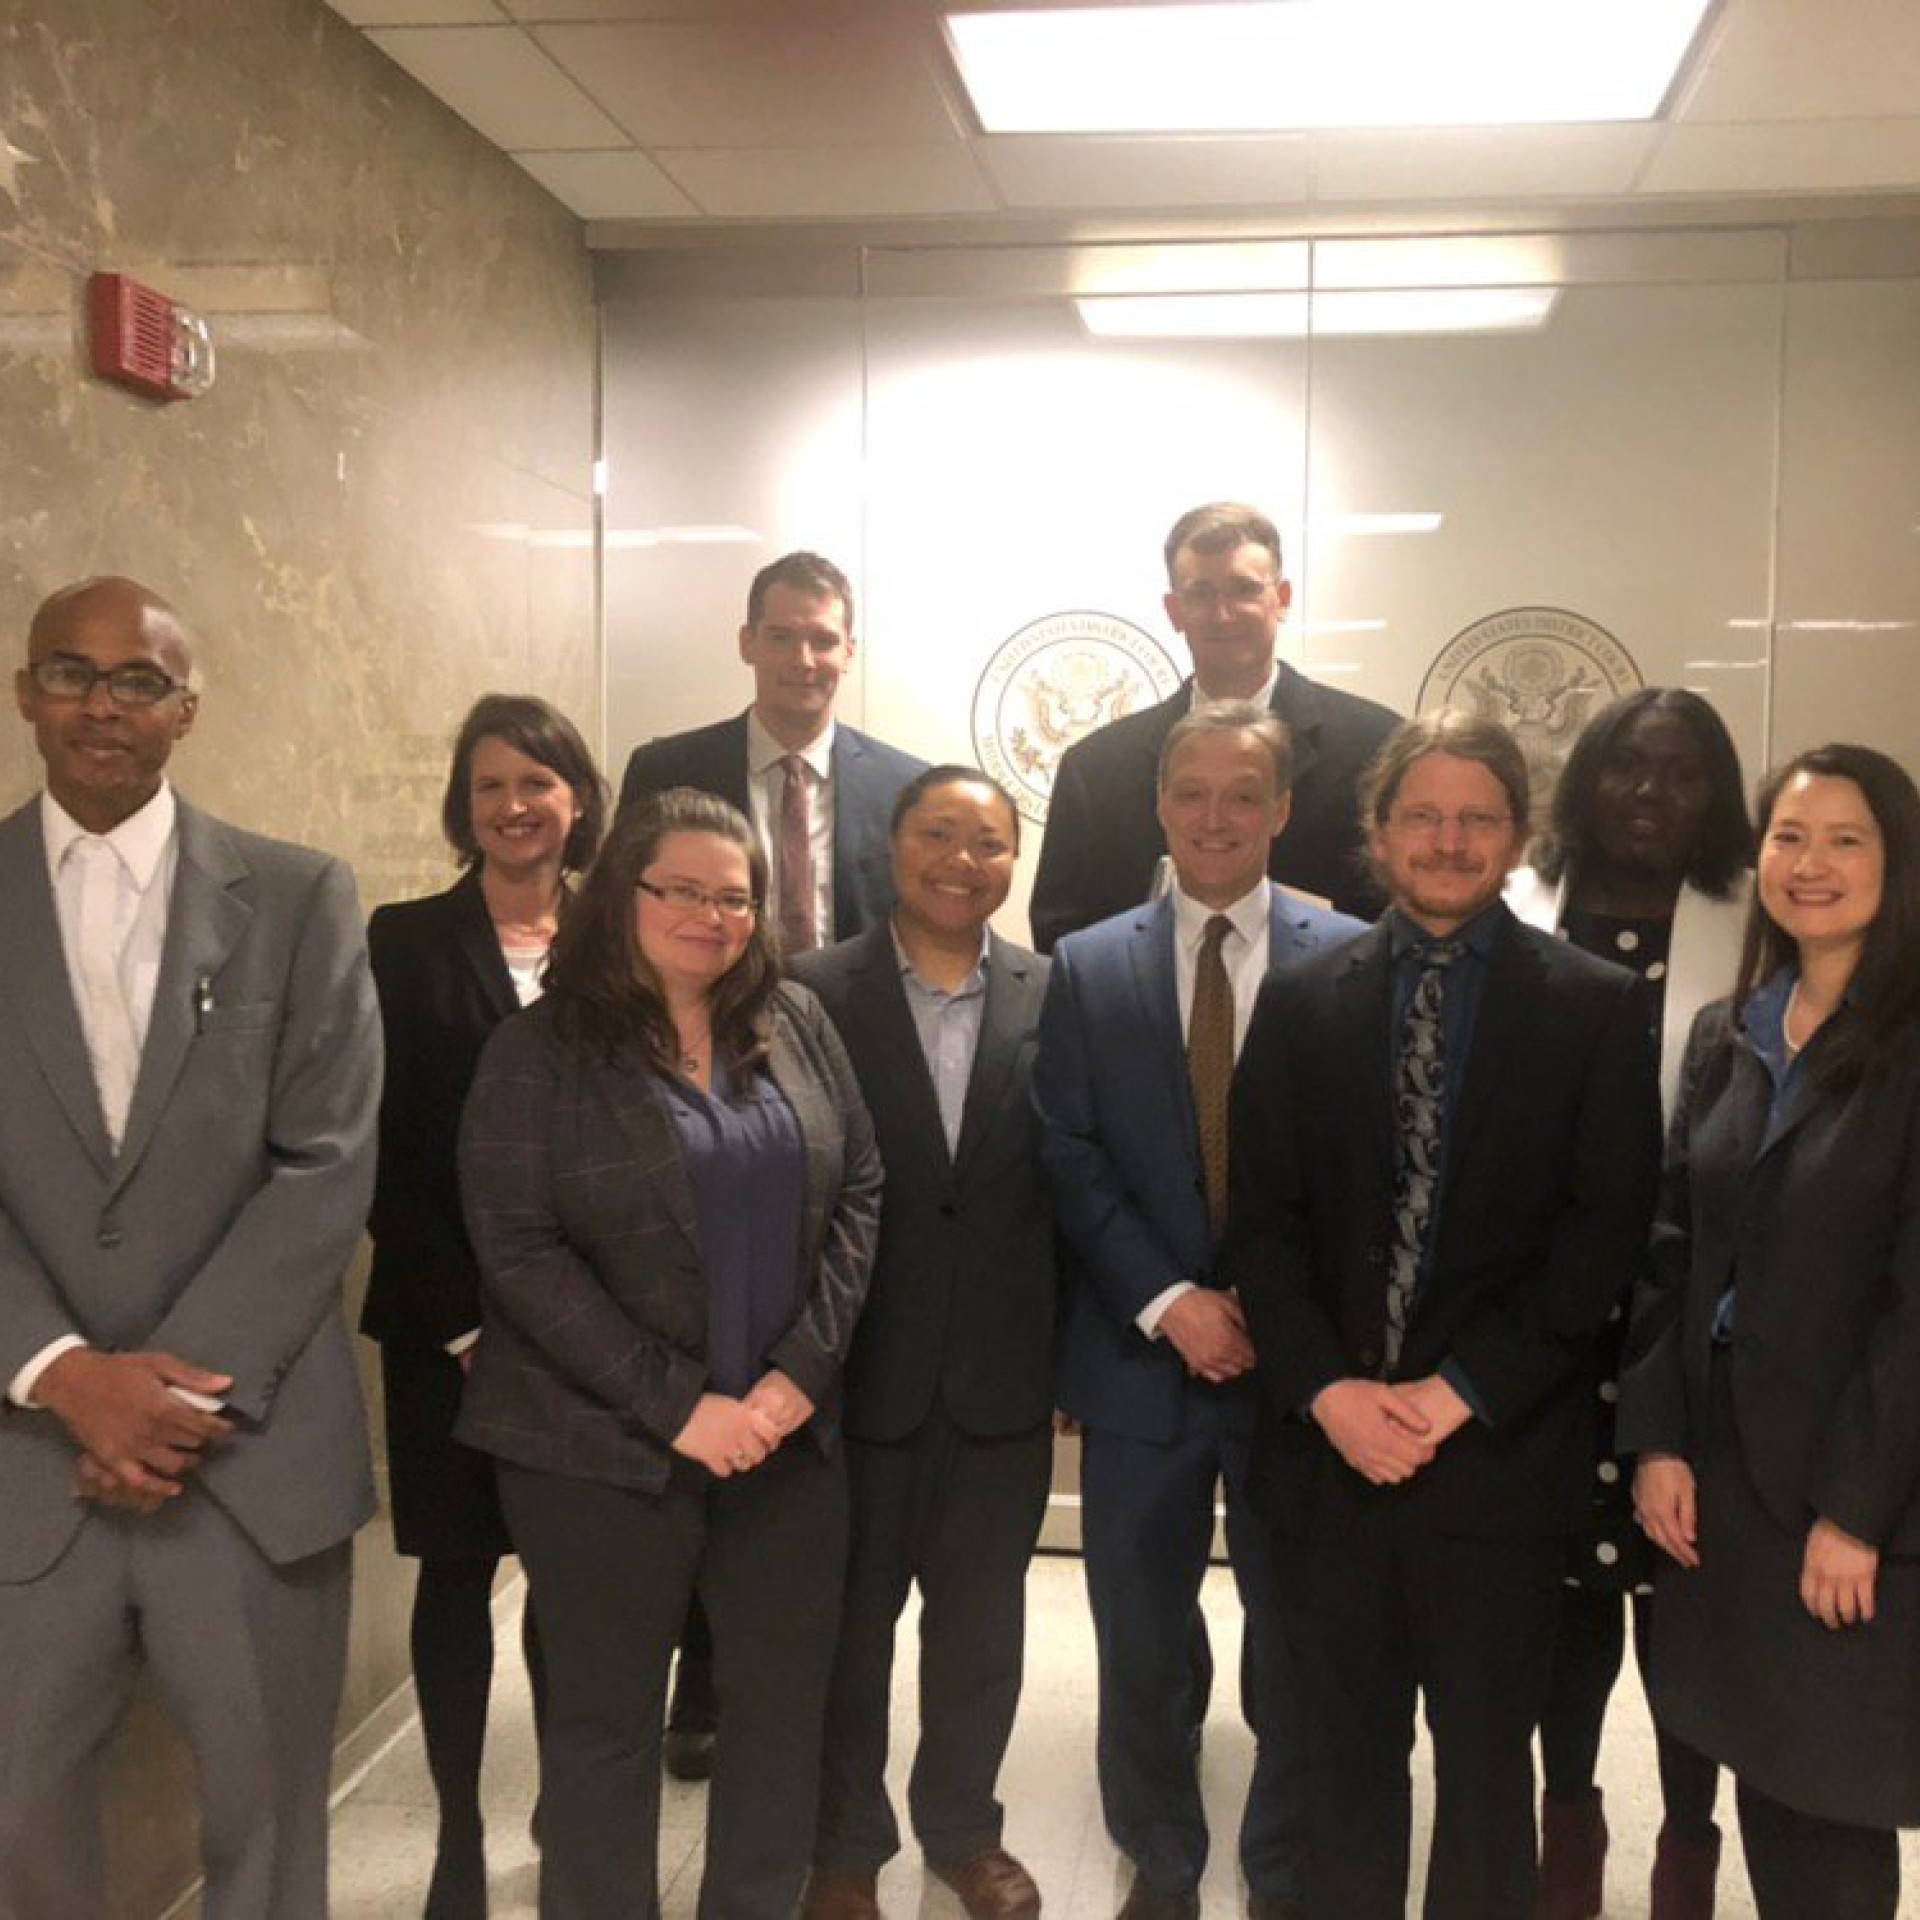 Attorneys from Amistad post with attorneys from Abolitionist Law Center, ACLU of PA, PA Institutional Law Project and Schnader Harrison Segal & Lewis 